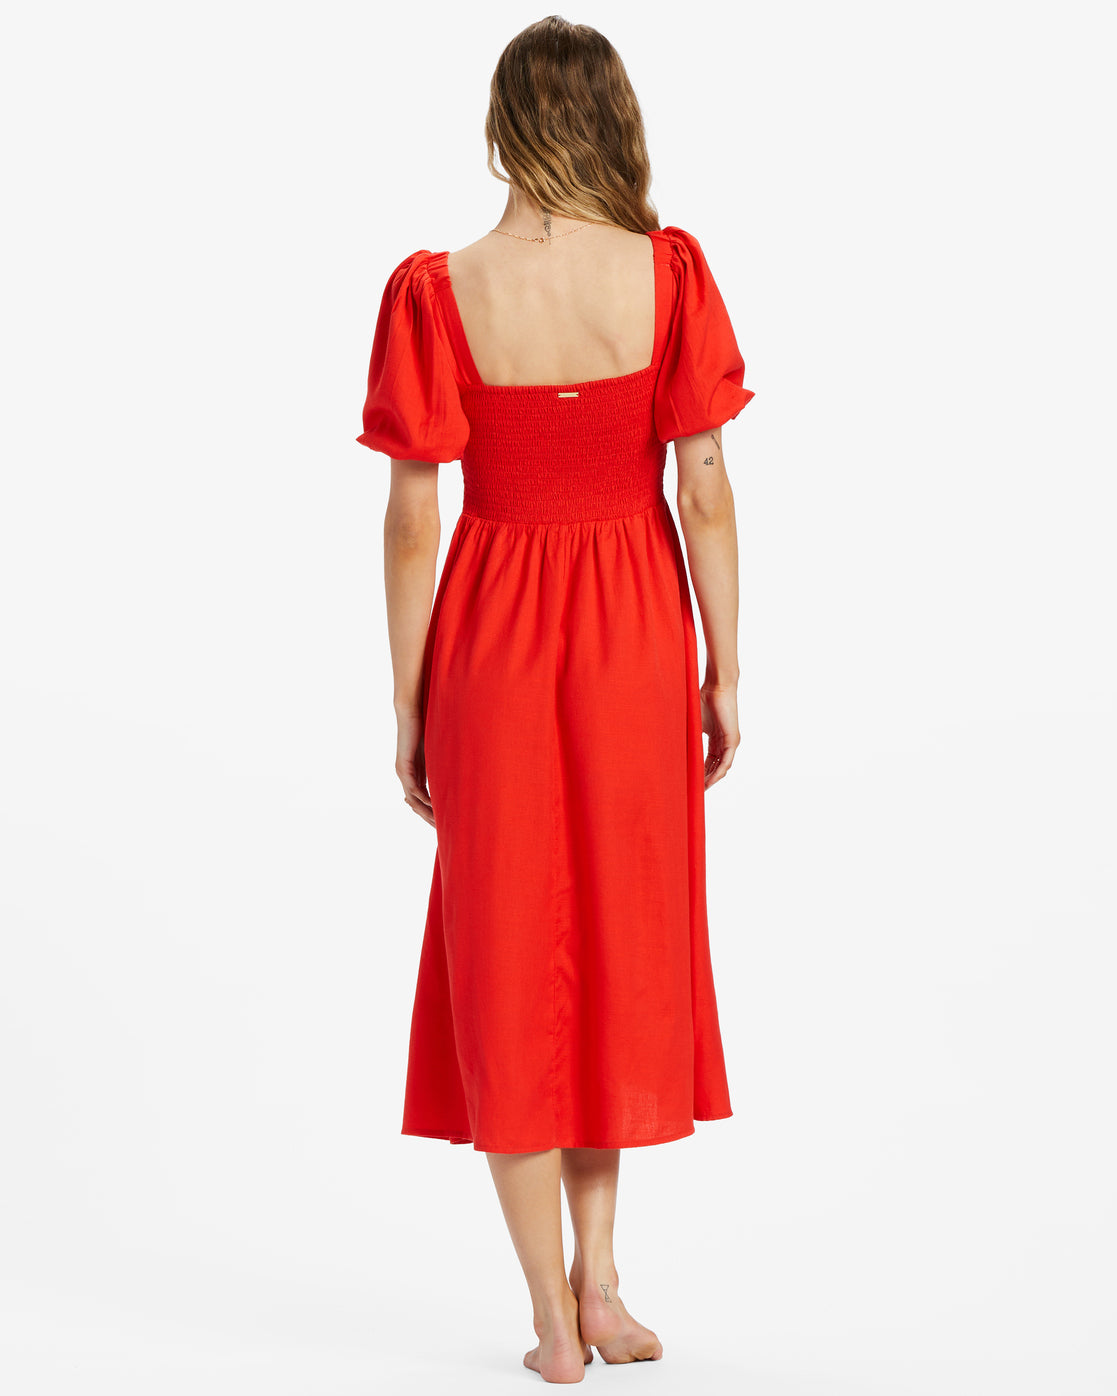 Billabong Lovers Lane Dress in rad red from back